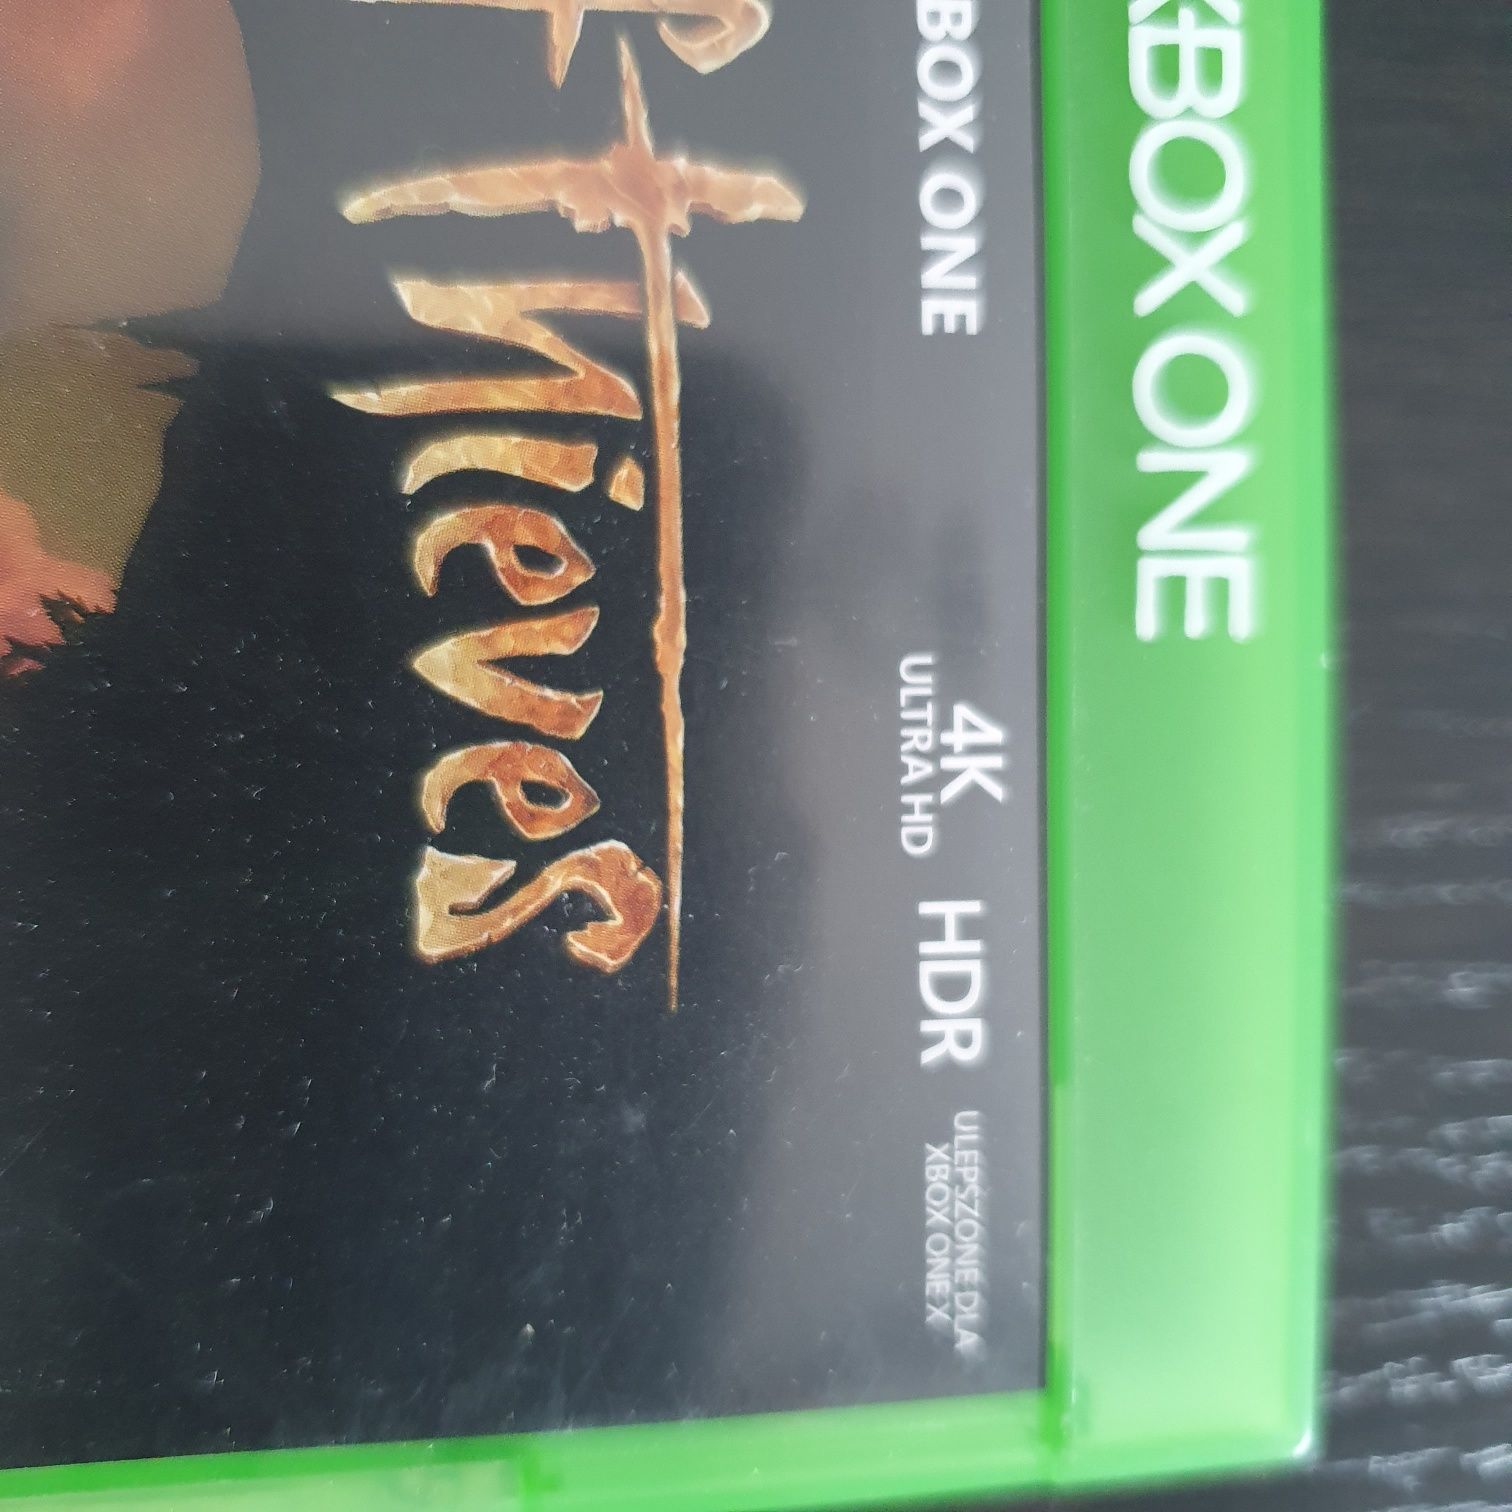 Sea of thieves 4K UHD HDR xbox one S Series X Ultra hd